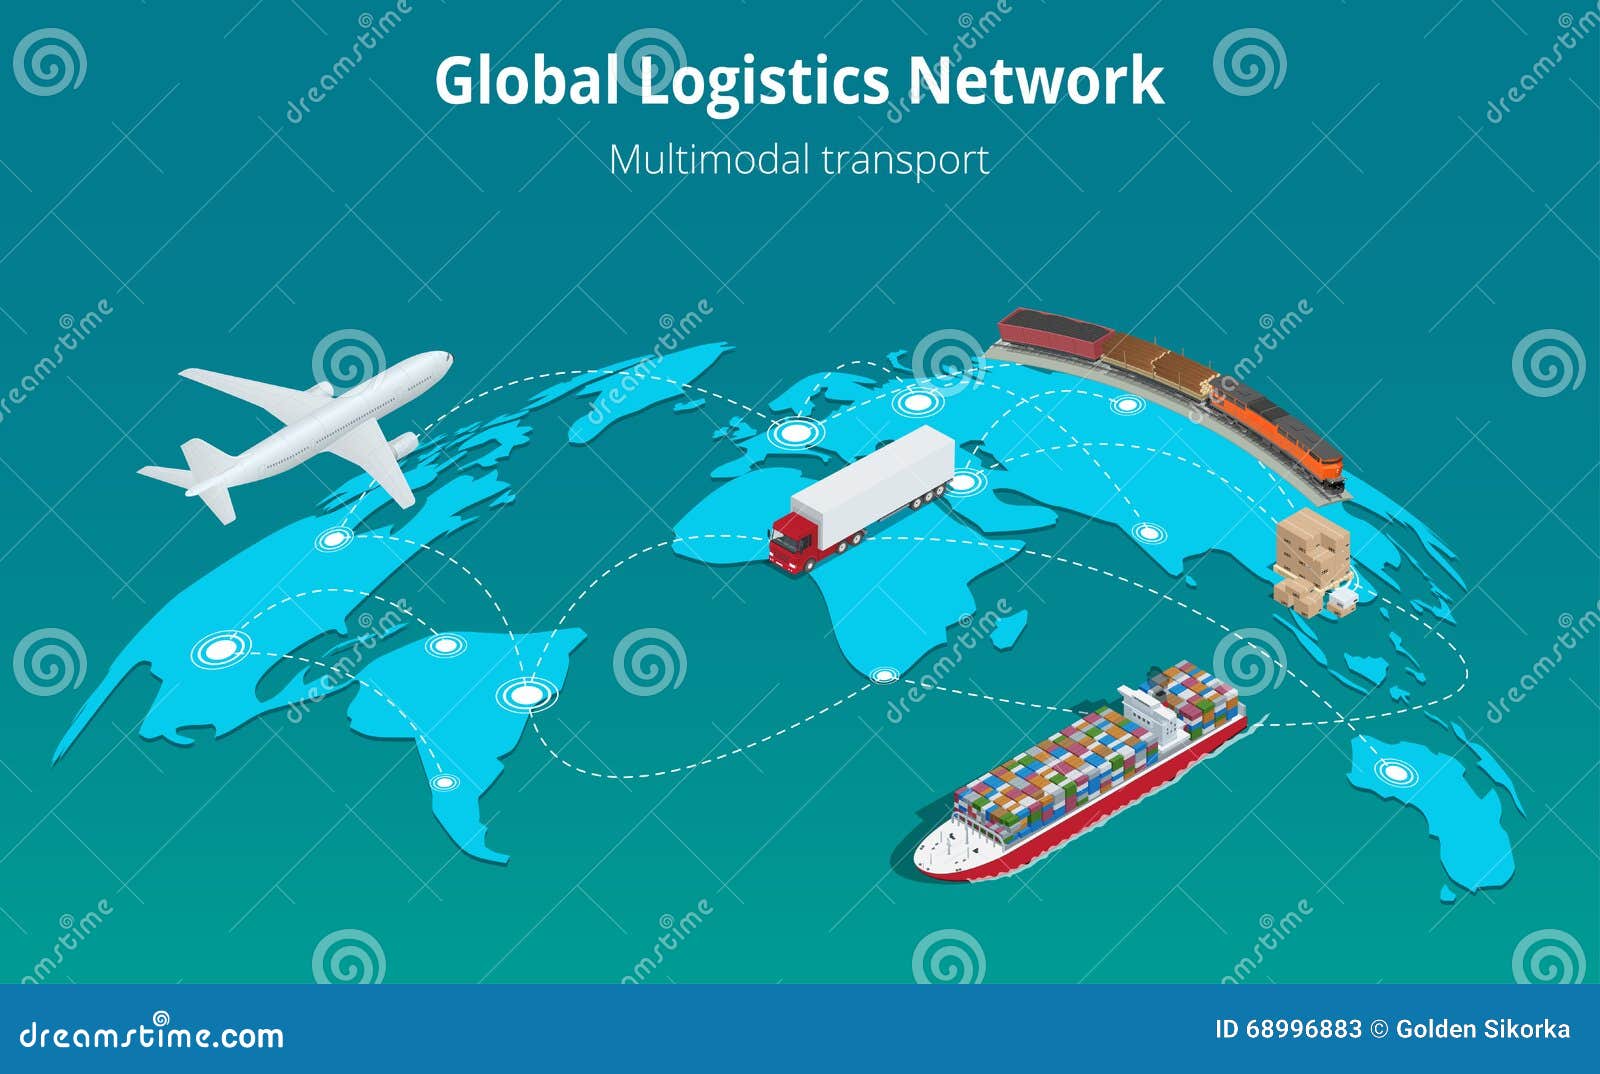 Eight Careers in Transportation and Logistics